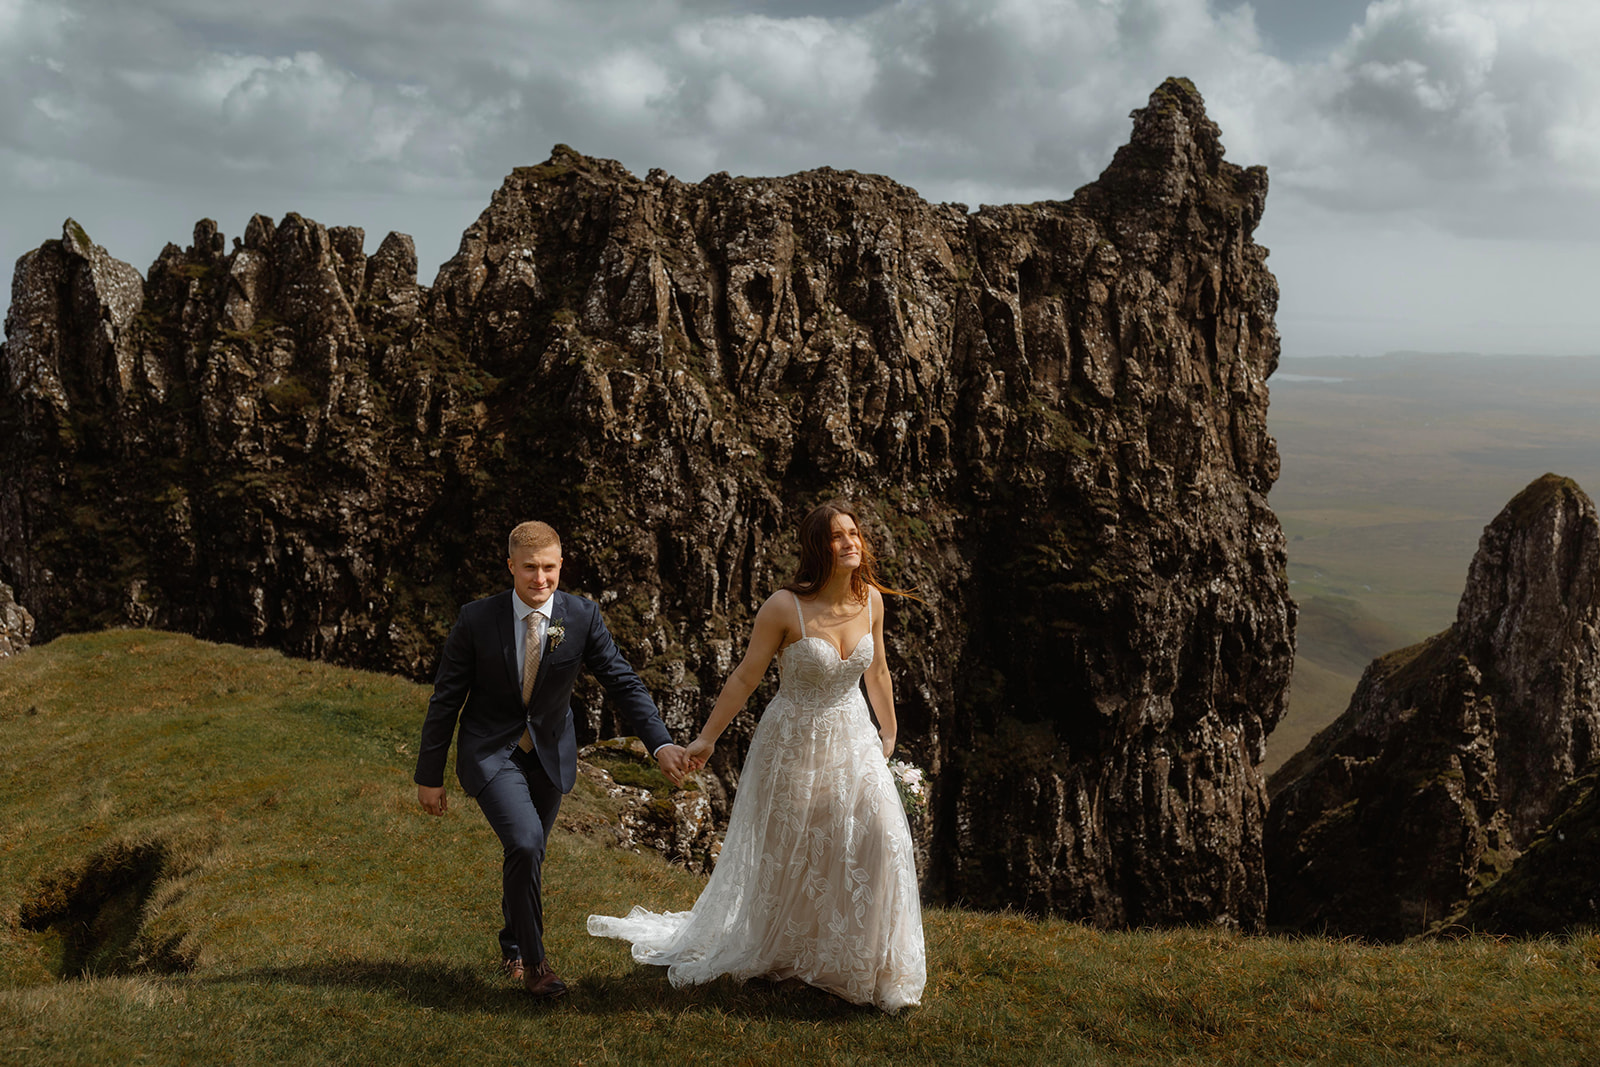 Emma and Matthew walked hand in hand as they stroll around the picturesque Isle of Skye during their elopement day